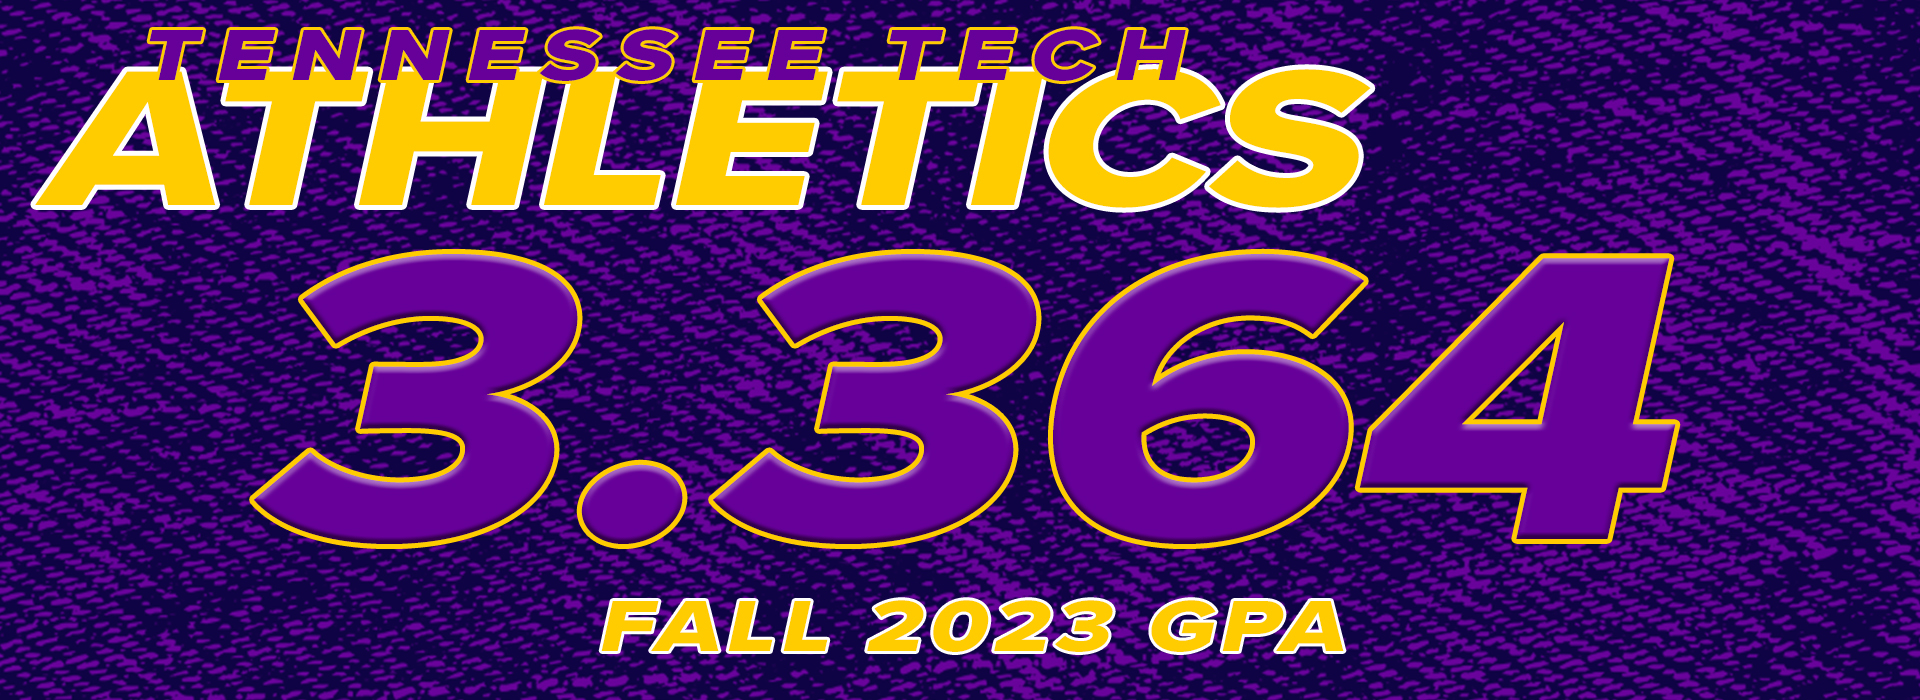 Golden Eagle student-athletes record 30th straight semester with a 3.0 or better GPA